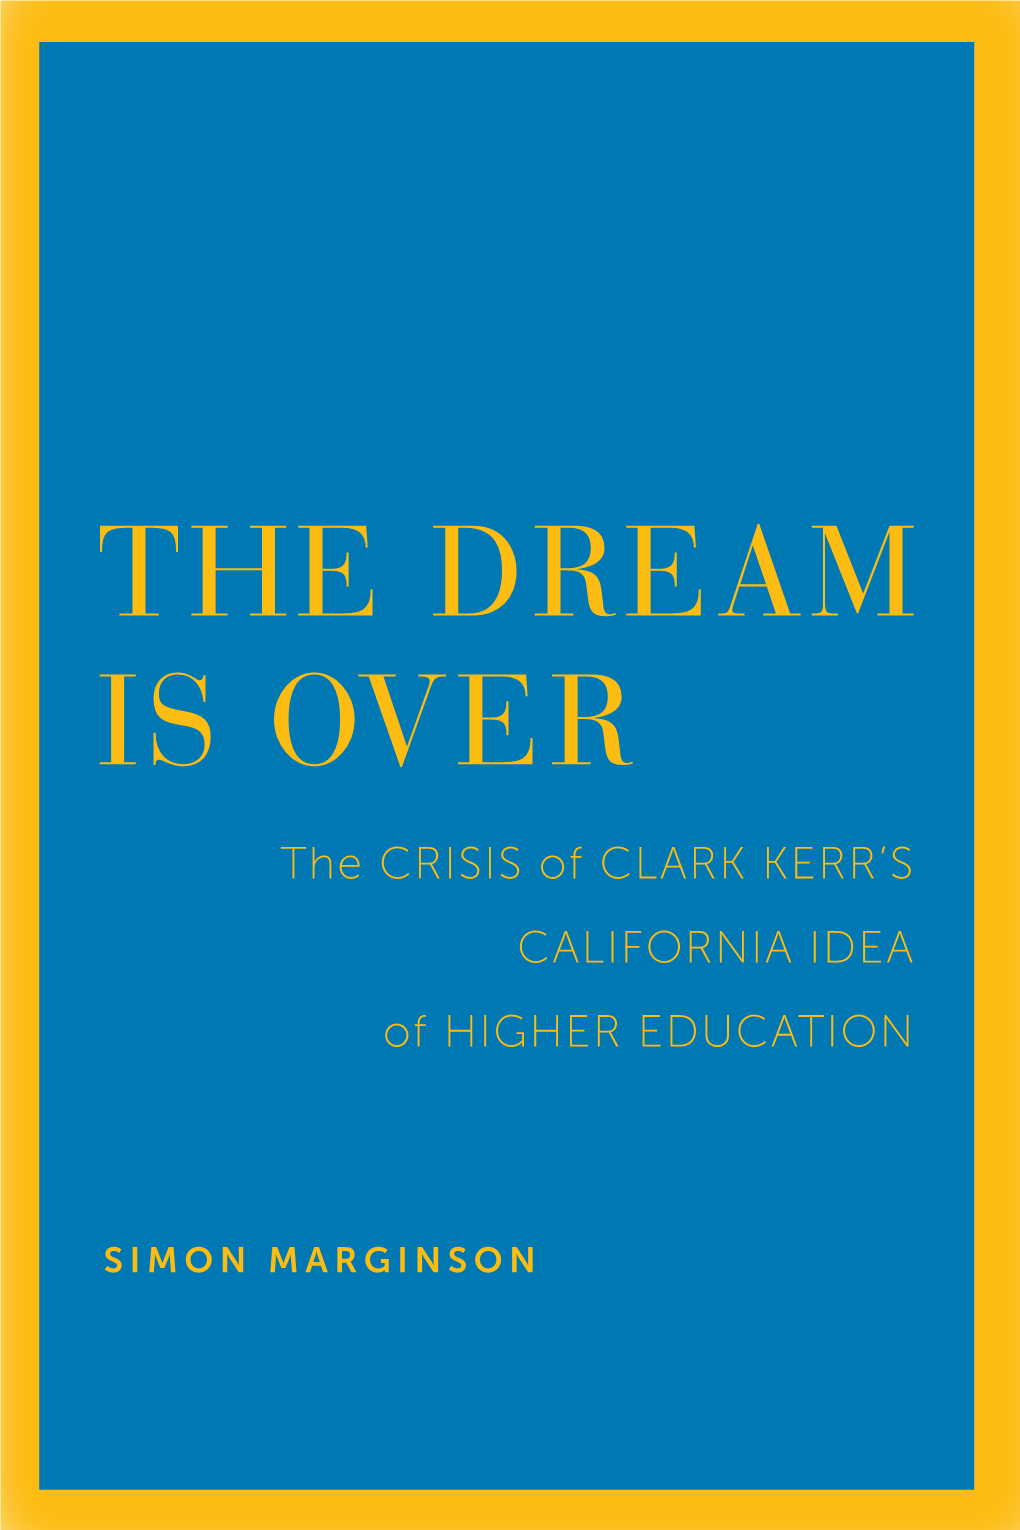 THE DREAM IS OVER the CRISIS of CLARK KERR’S CALIFORNIA IDEA of HIGHER EDUCATION